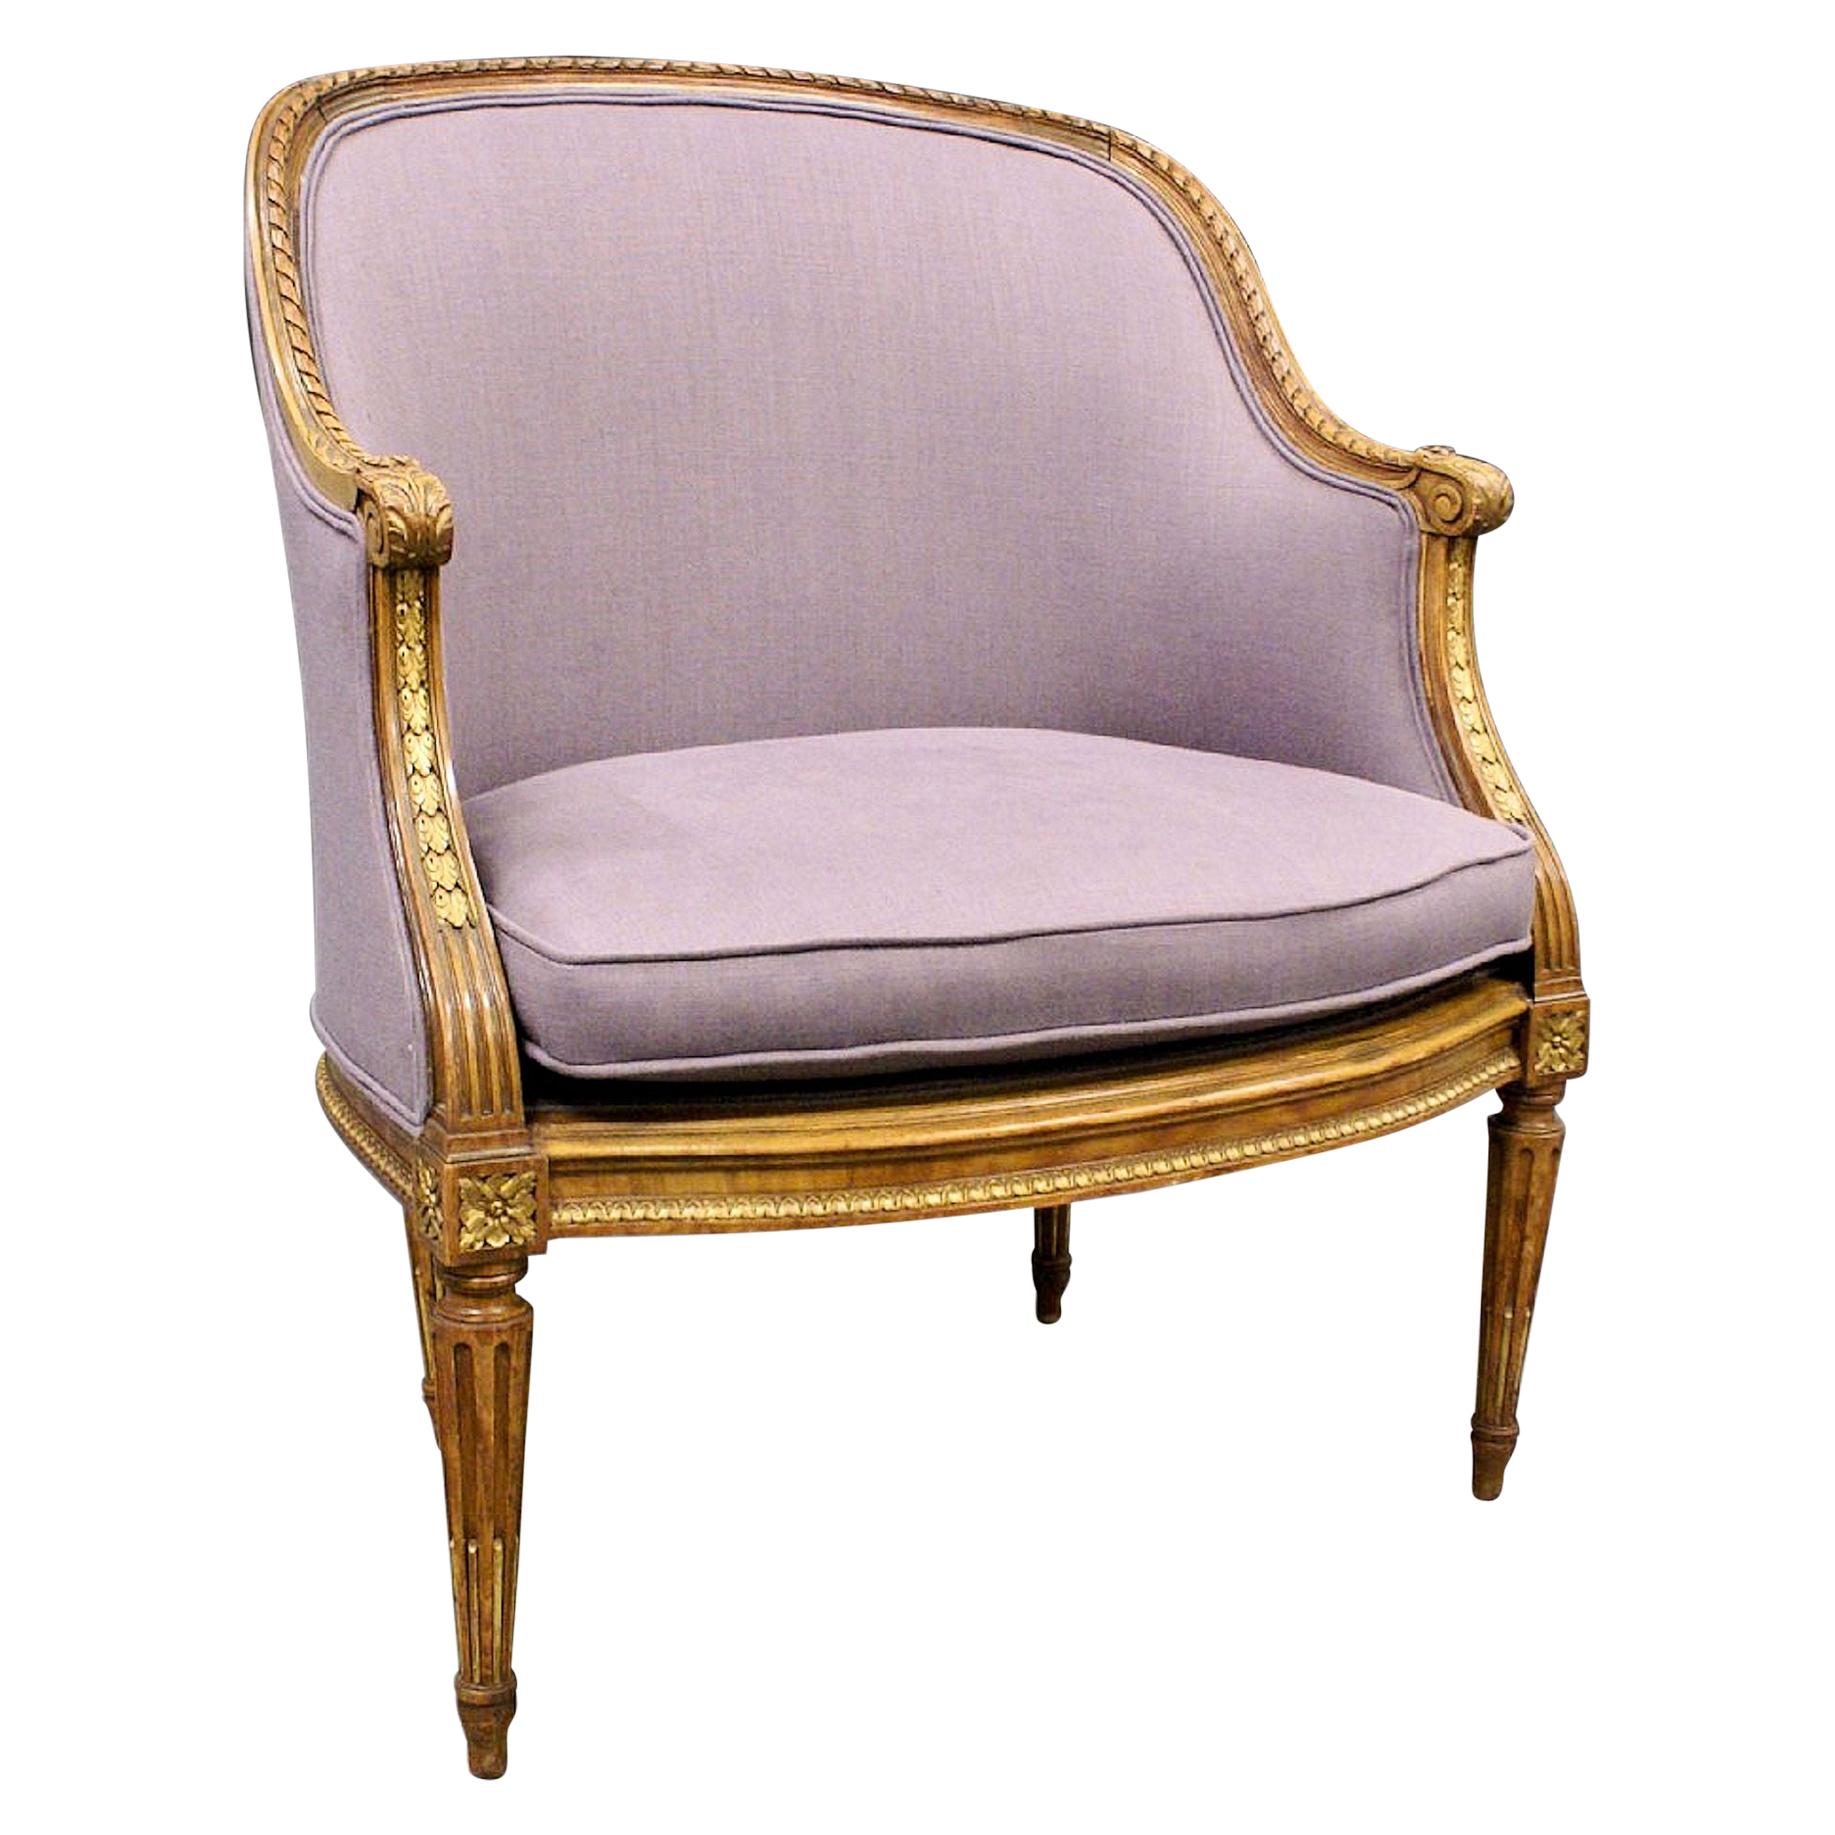 19th C. French Walnut Upholstered Armchair For Sale